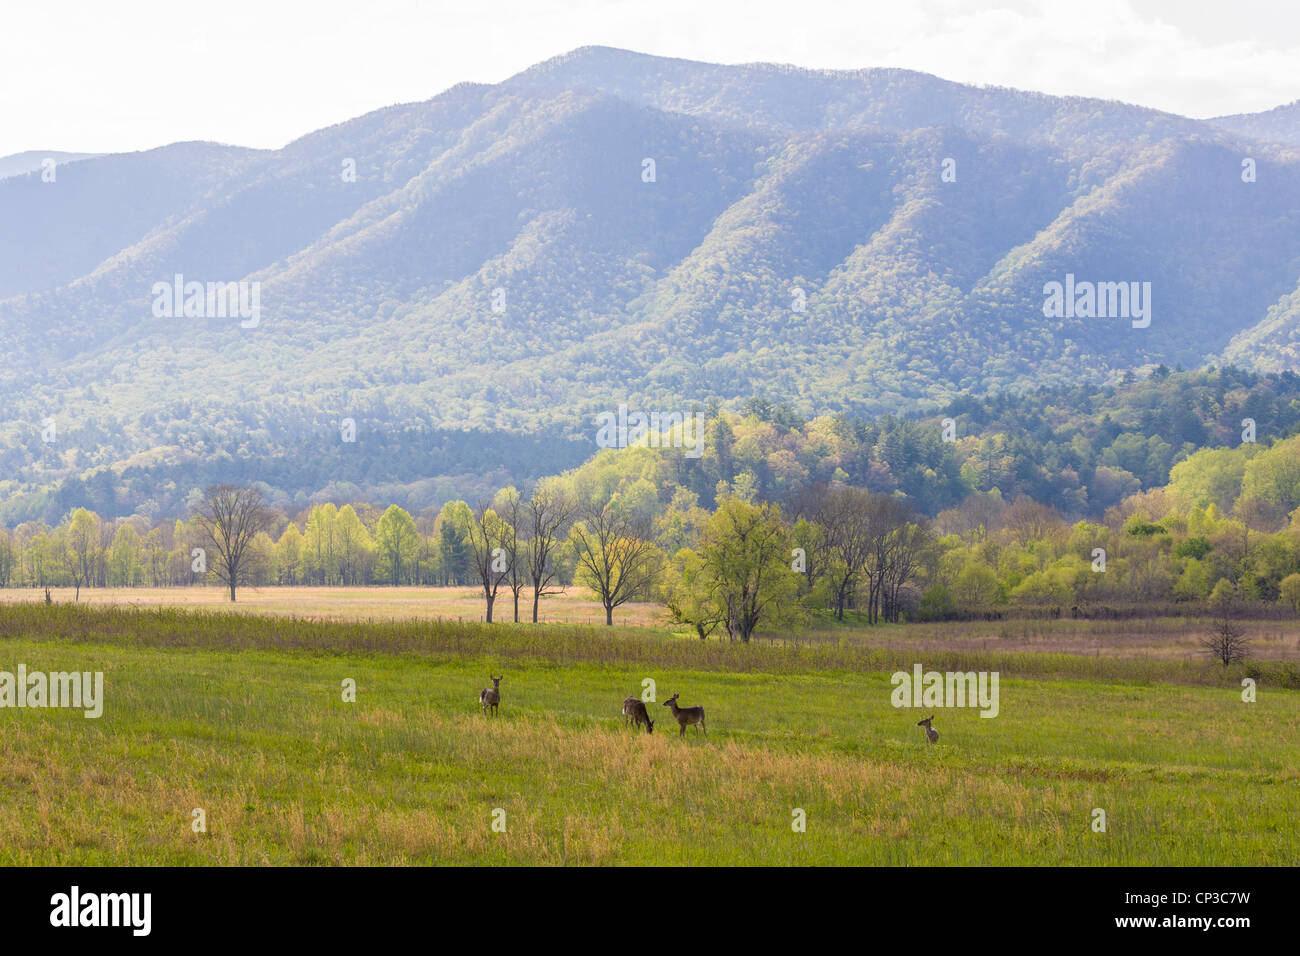 Cades Cove in the Great Smoky Mountains National Park in Tennessee Stock Photo